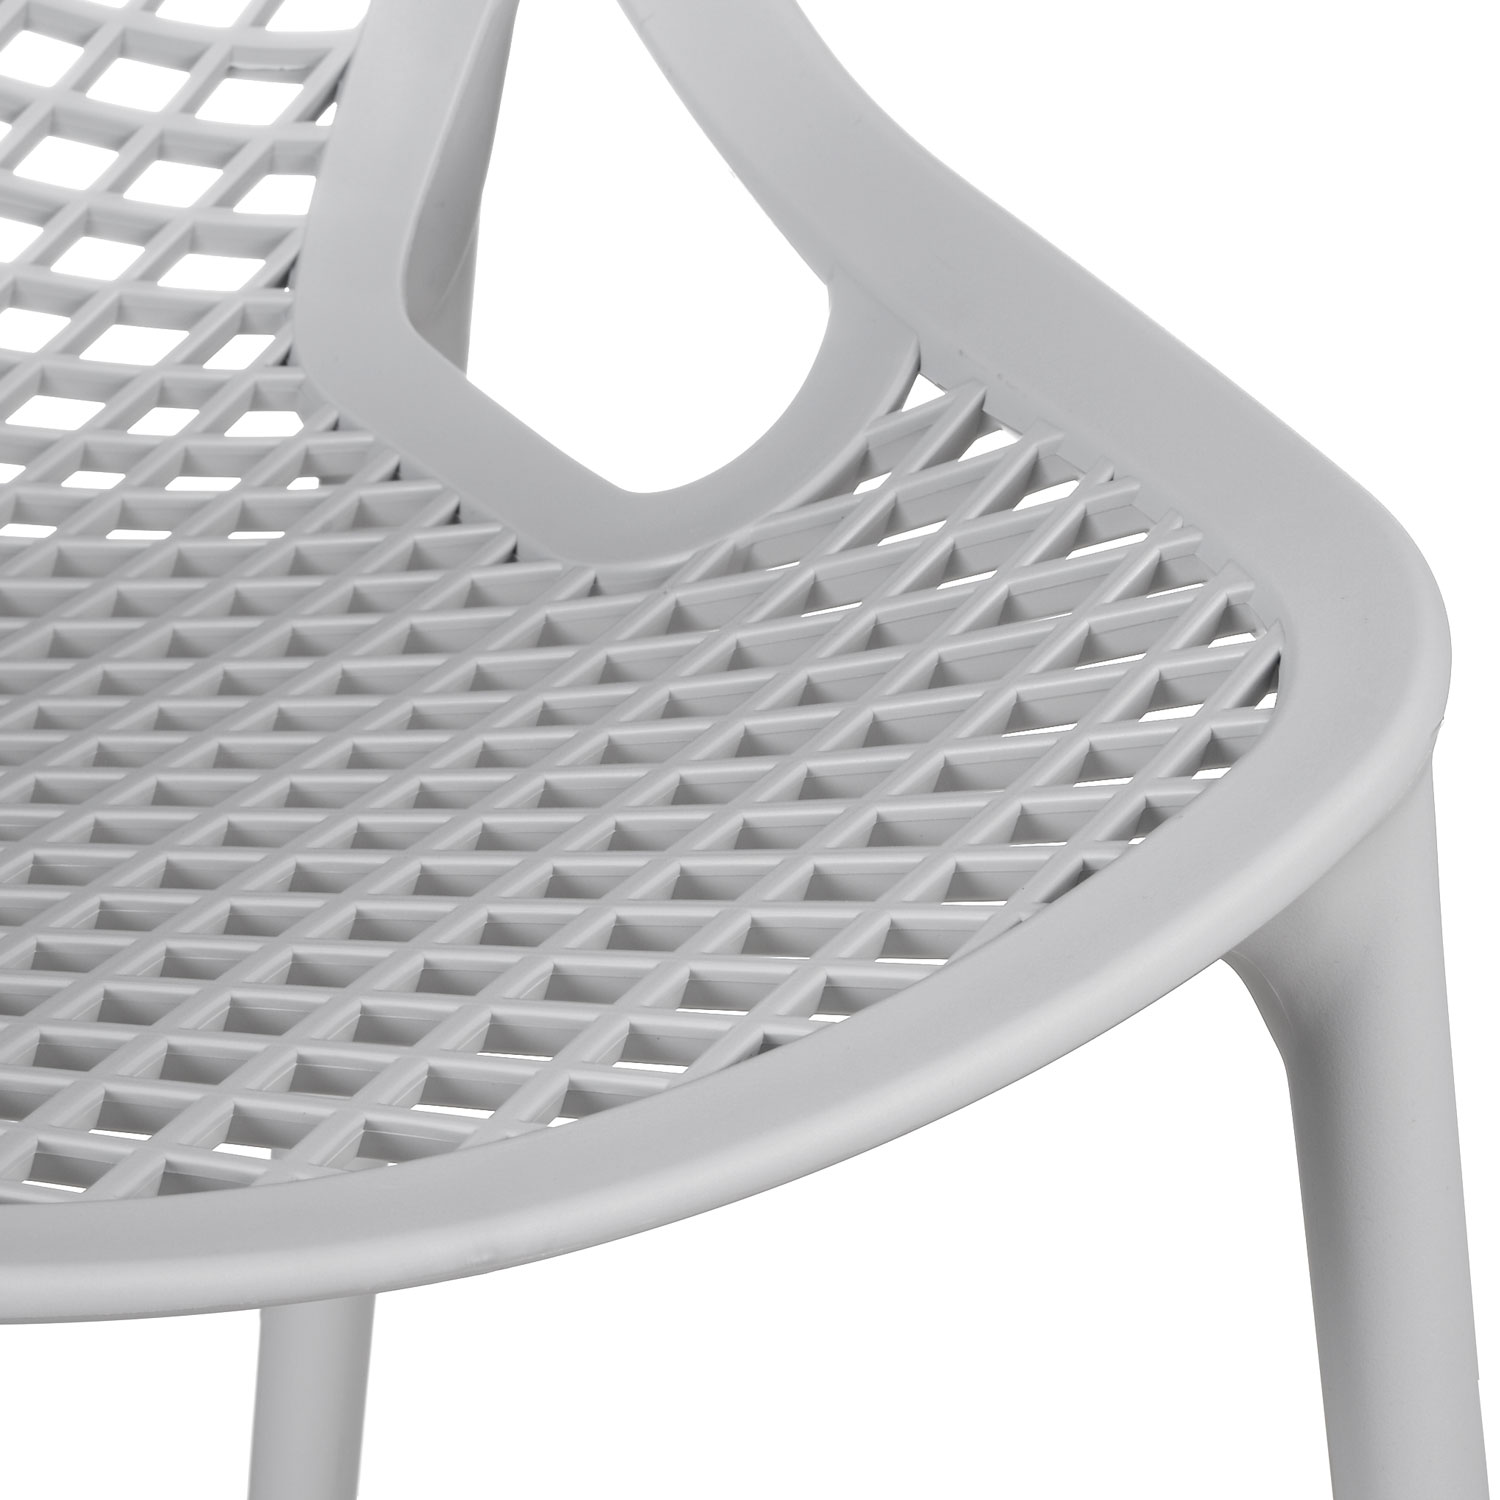 Garden chair Set of 2 Camping chairs Grey Outdoor chairs Plastic Egg chair Lounger chairs Stacking chairs